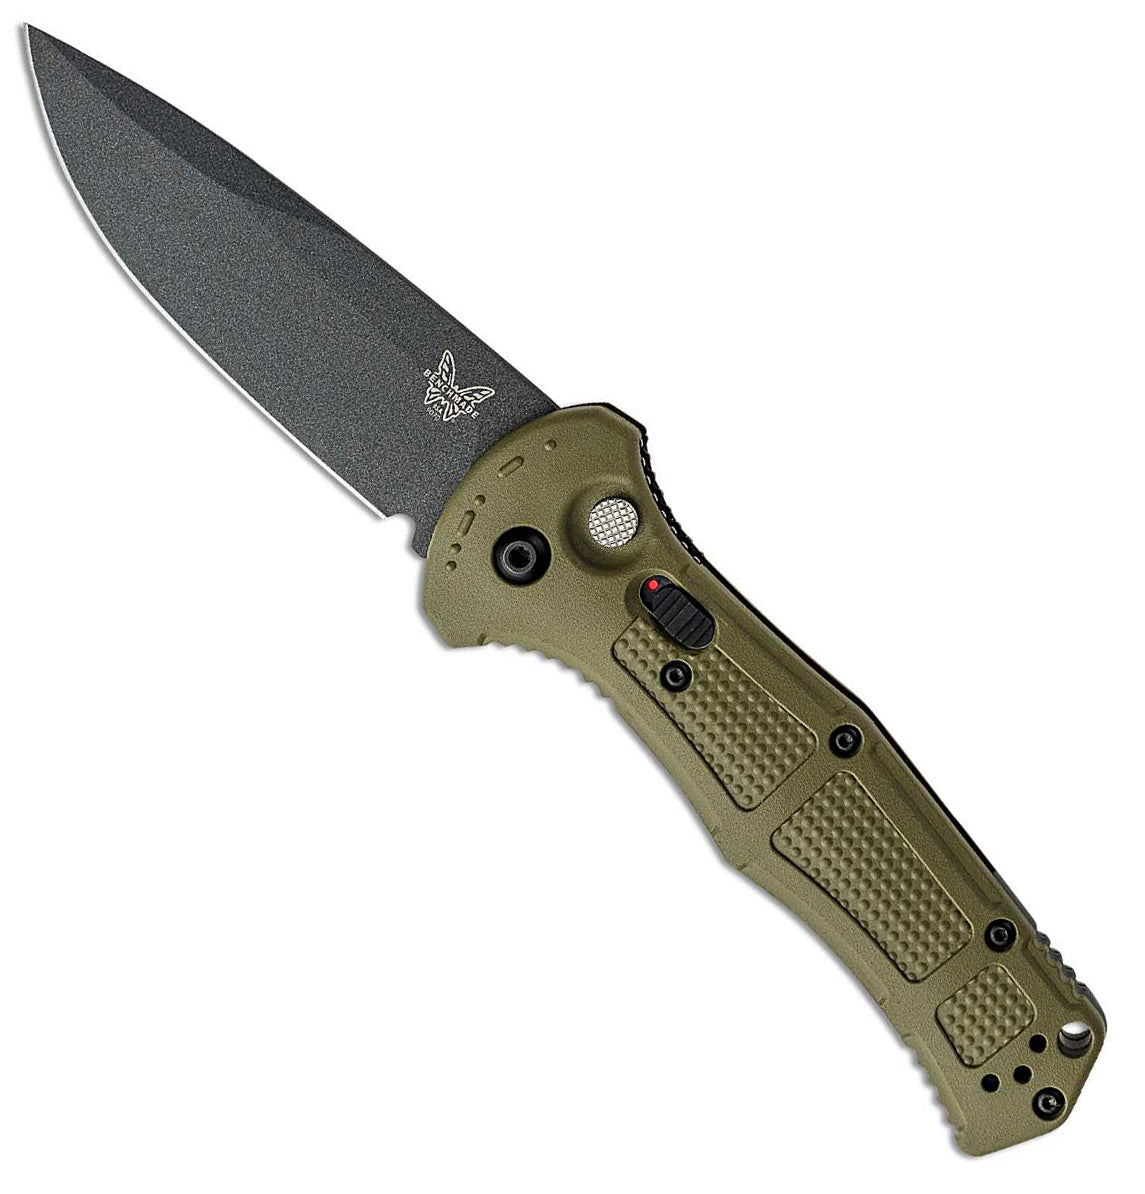 Benchmade Claymore - Automatic - CPM-D2 Blade - Grivory Handle - 9070BK-1